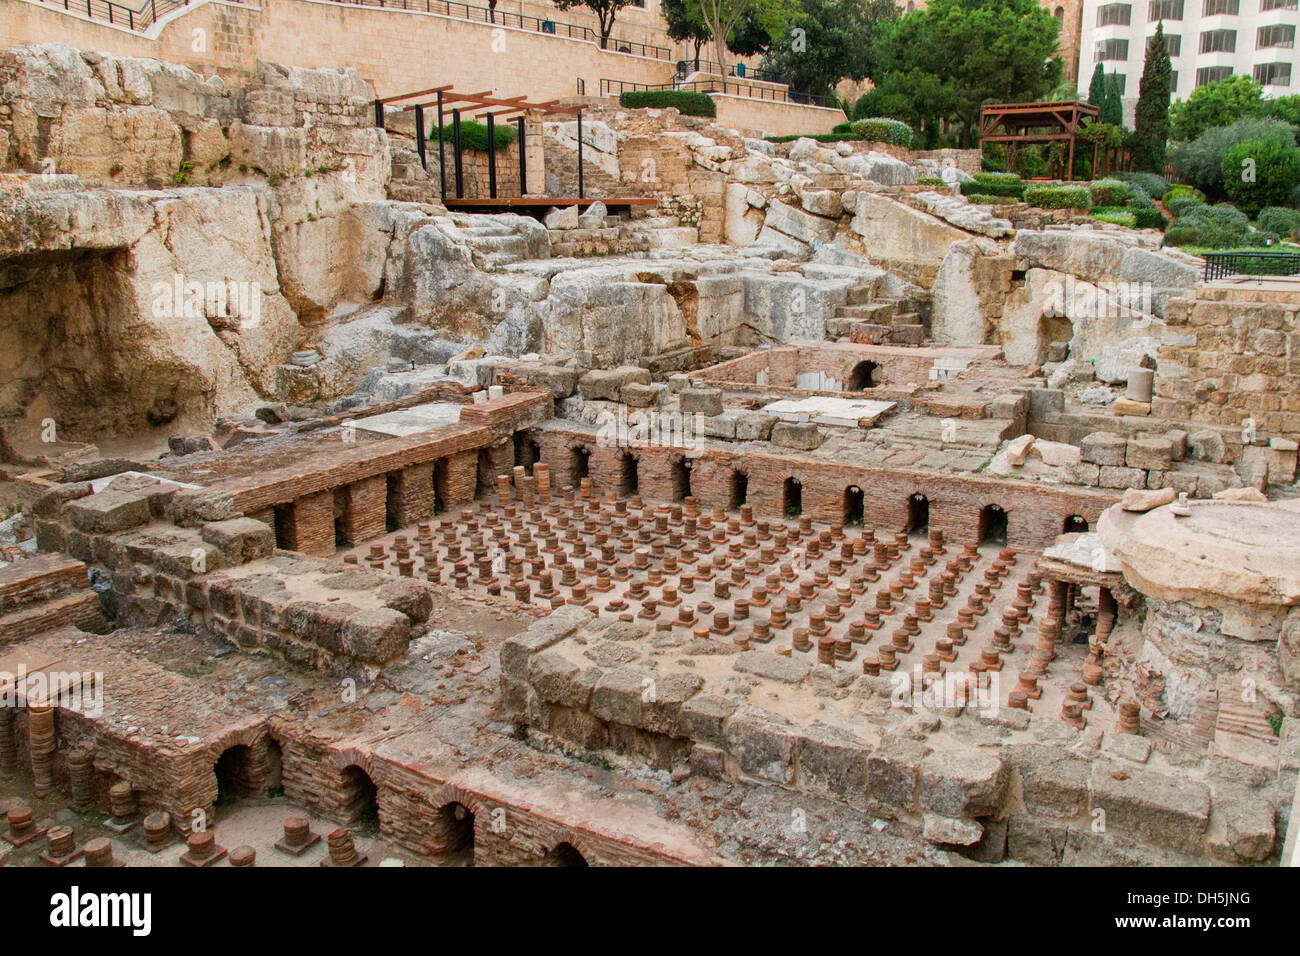 Foundations of the Roman baths, archaeological excavation site, Beirut, Lebanon Stock Photo